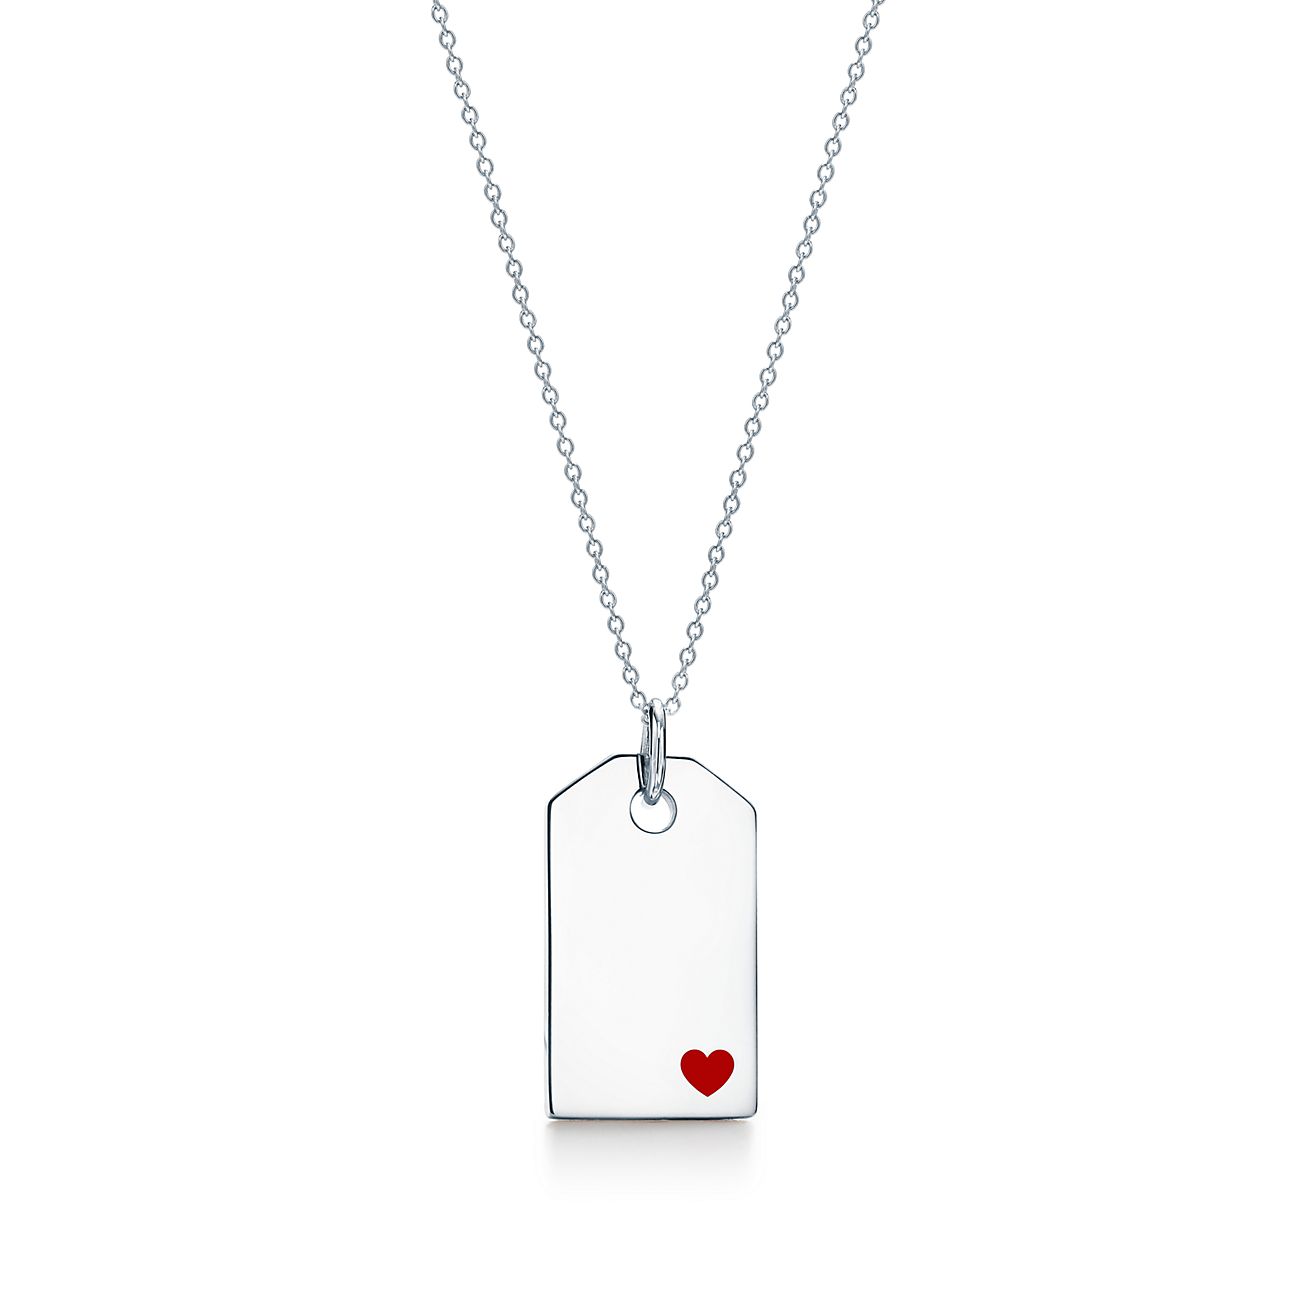 Tiffany Charms tag pendant with a red 